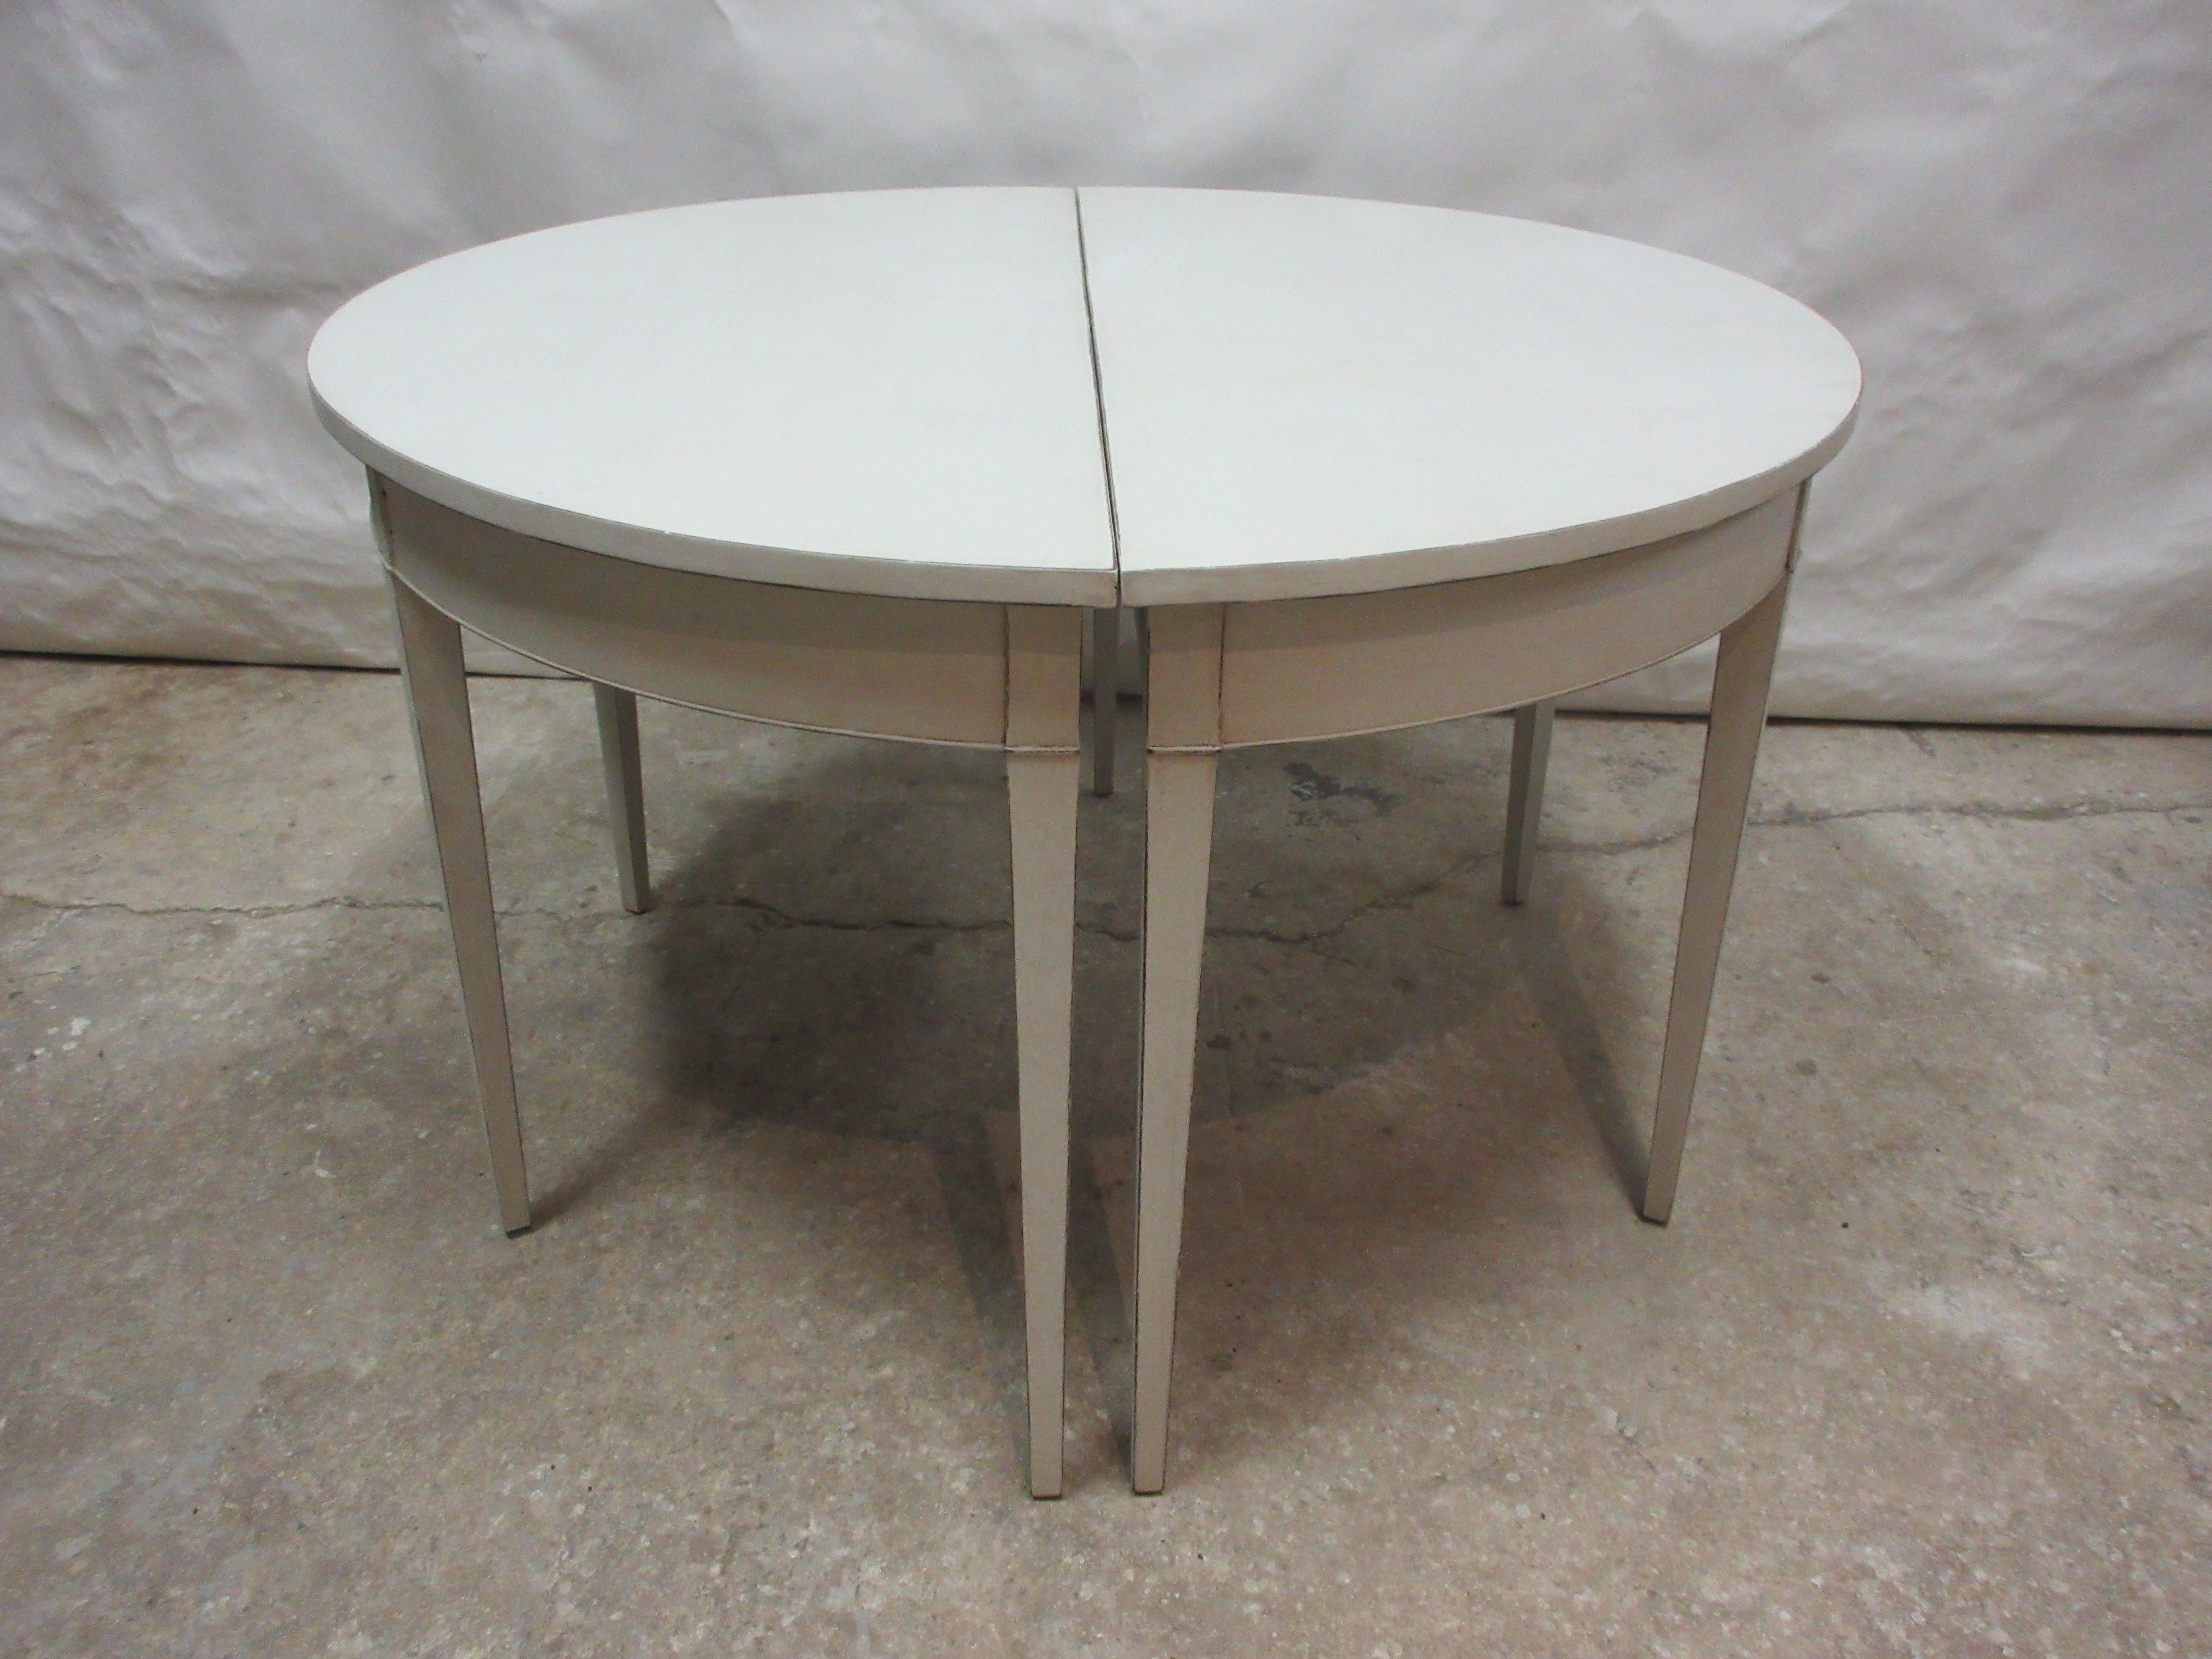 Gustavian Style 4 Legged Demi-Lune Tables For Sale 3